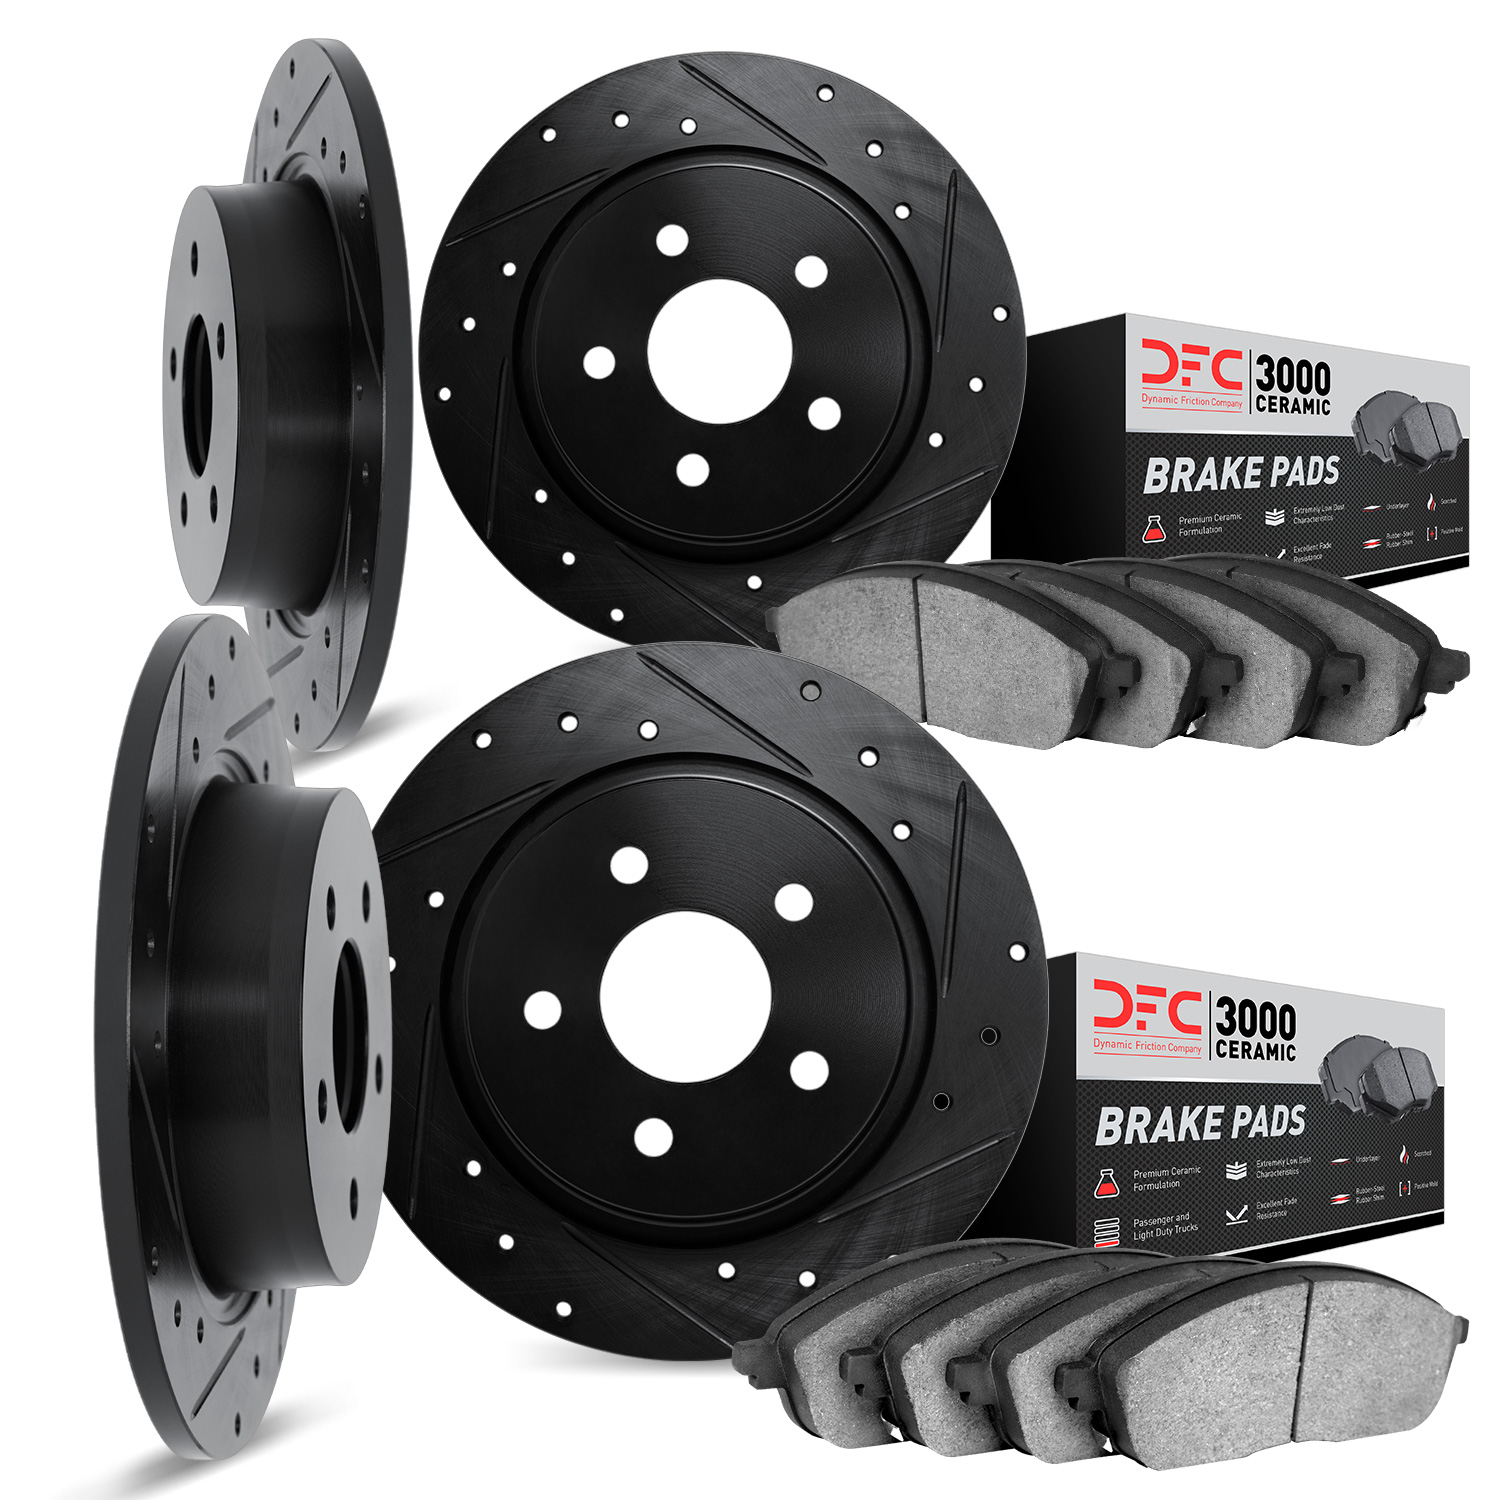 8304-31030 Drilled/Slotted Brake Rotors with 3000-Series Ceramic Brake Pads Kit [Black], 1995-1998 BMW, Position: Front and Rear